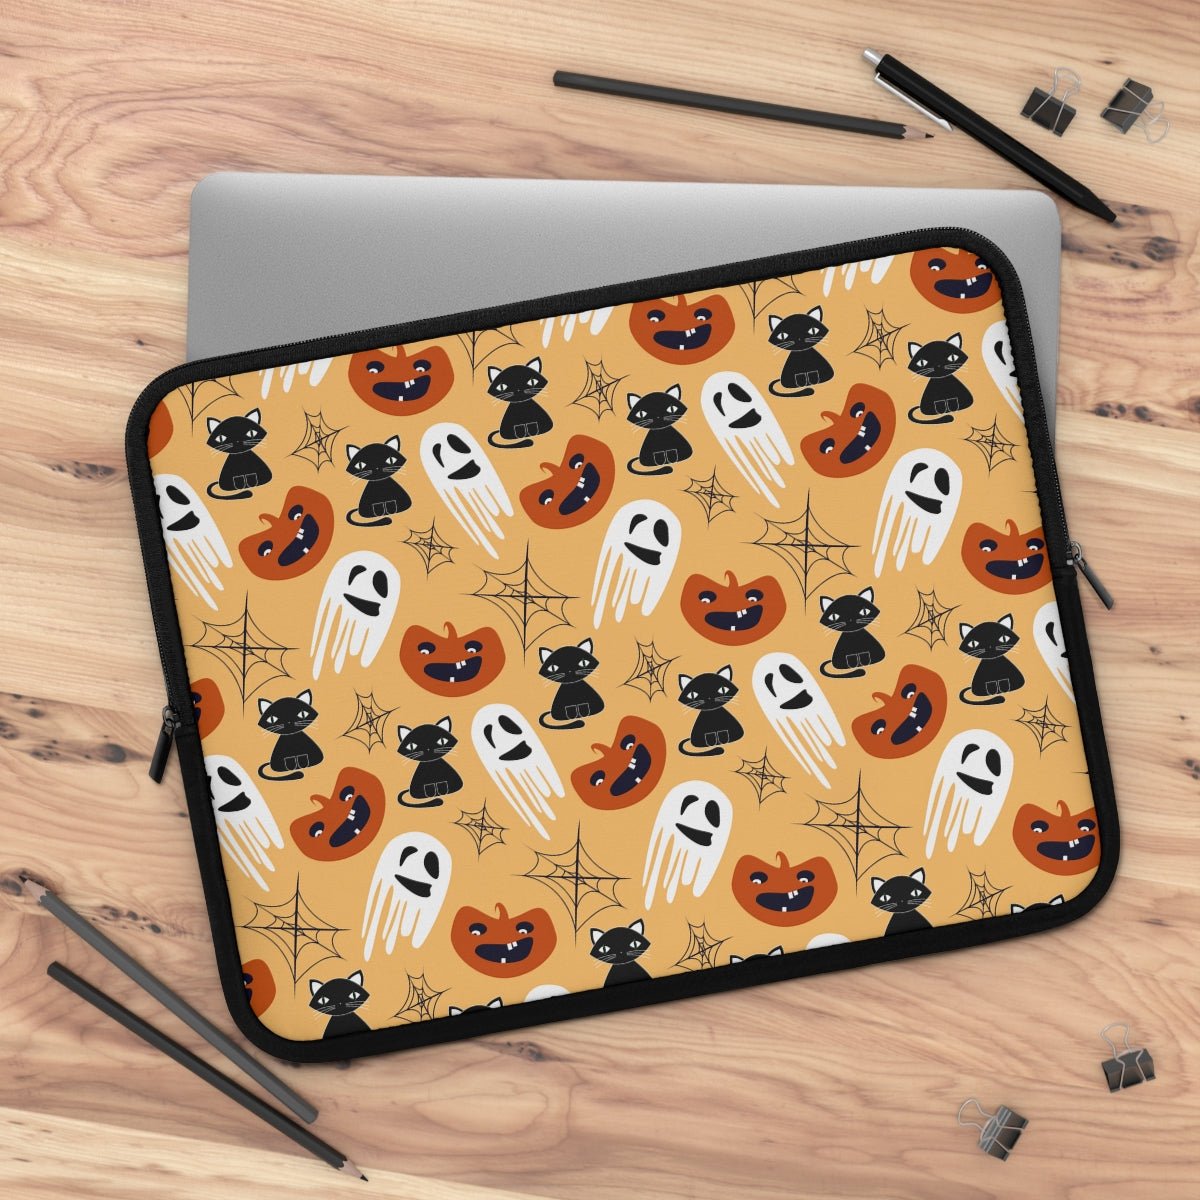 Halloween Cats and Ghosts Laptop Sleeve - Puffin Lime